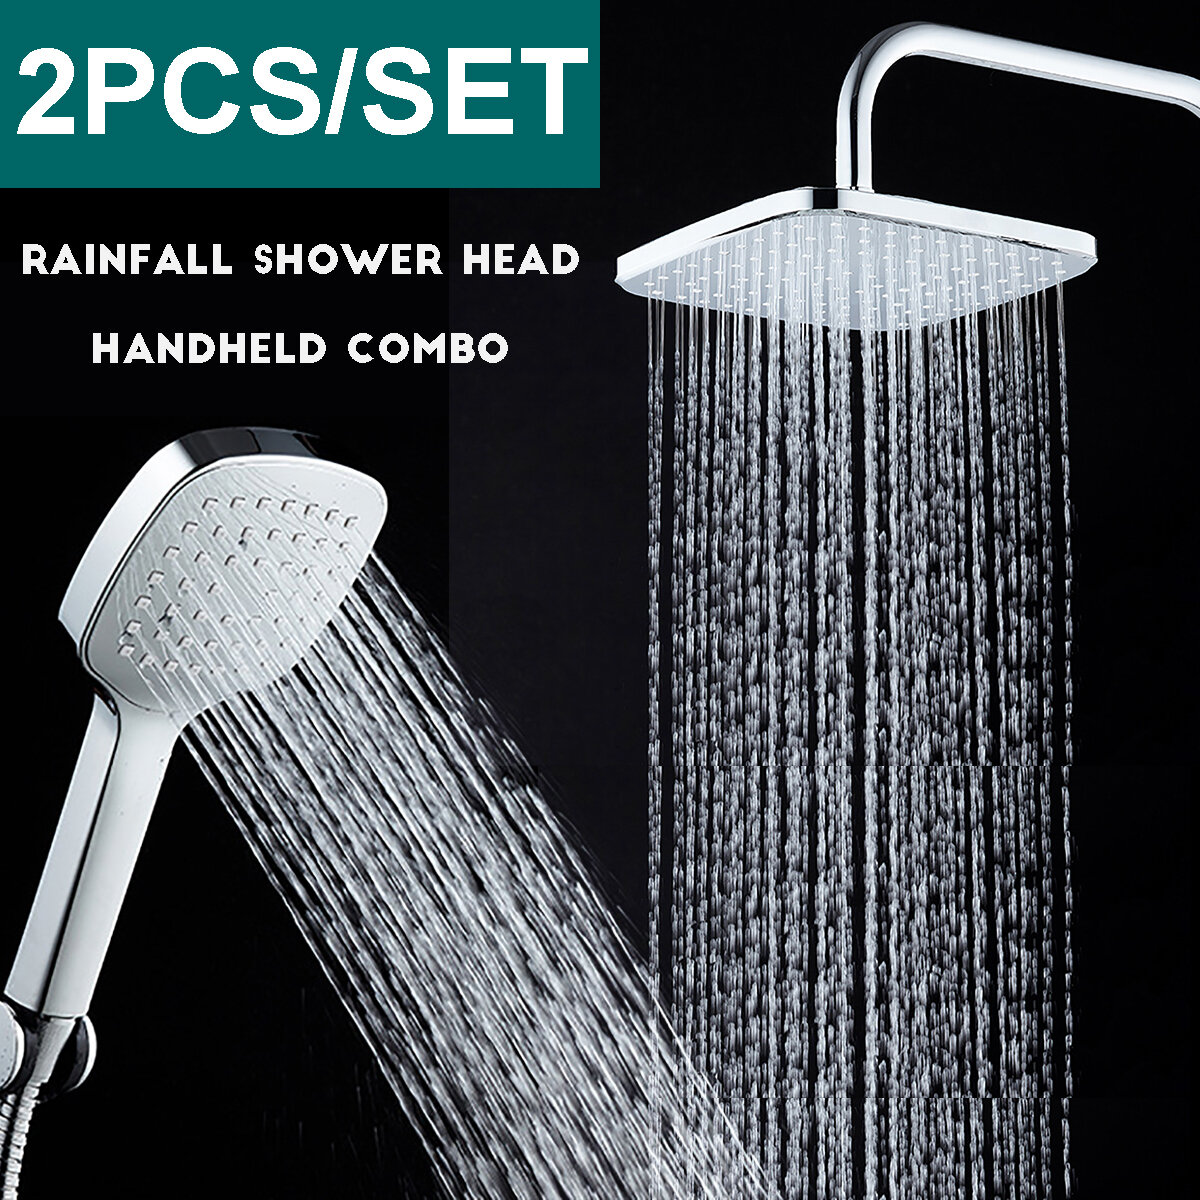 best price,2pcs,abs,shower,set,coupon,price,discount